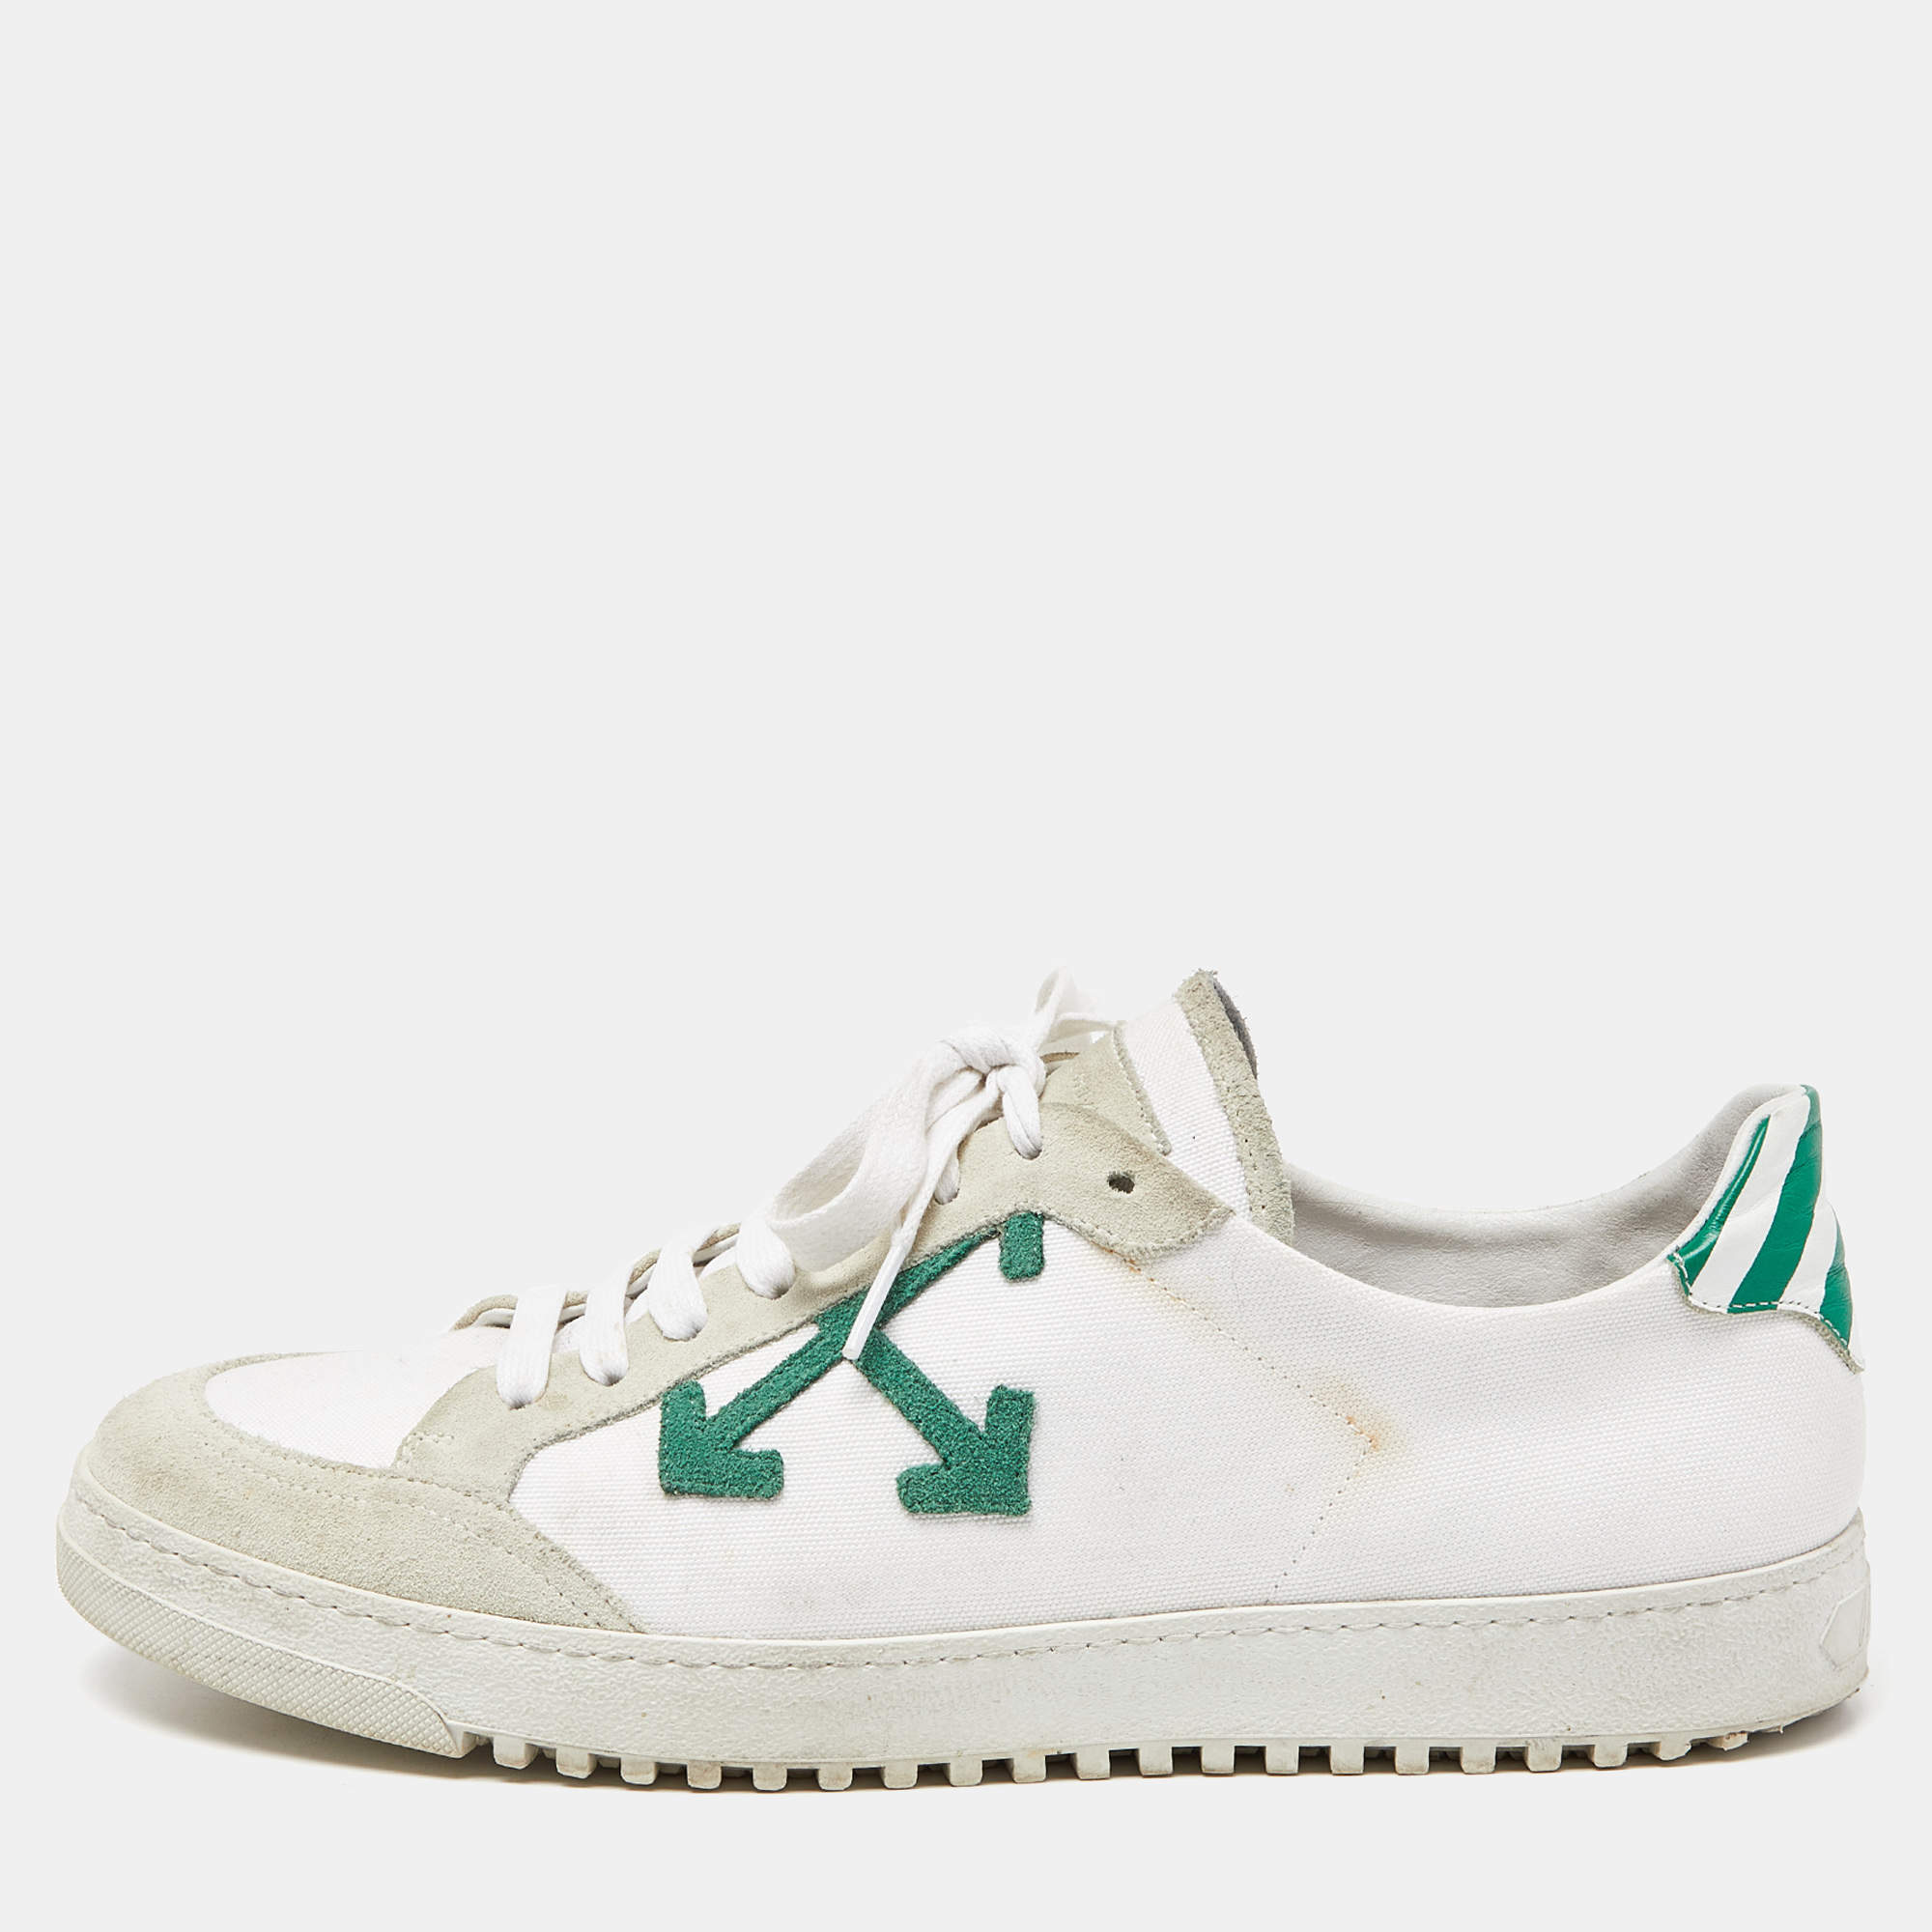 Off-White White/Green Canvas and Leather Vulcanized Sneakers Size 44